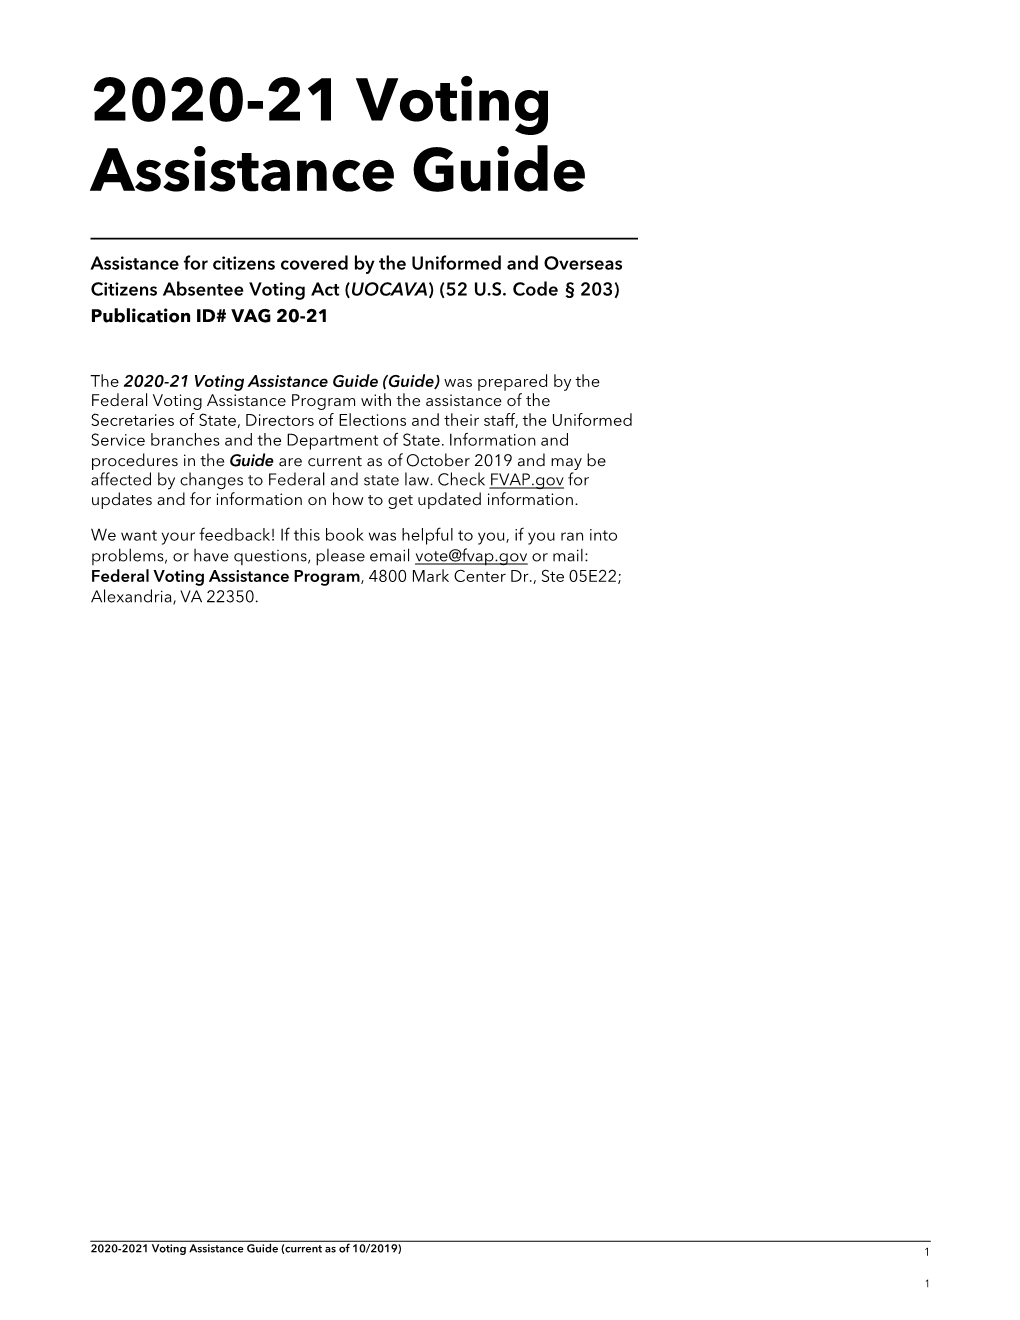 2020-21 Voting Assistance Guide